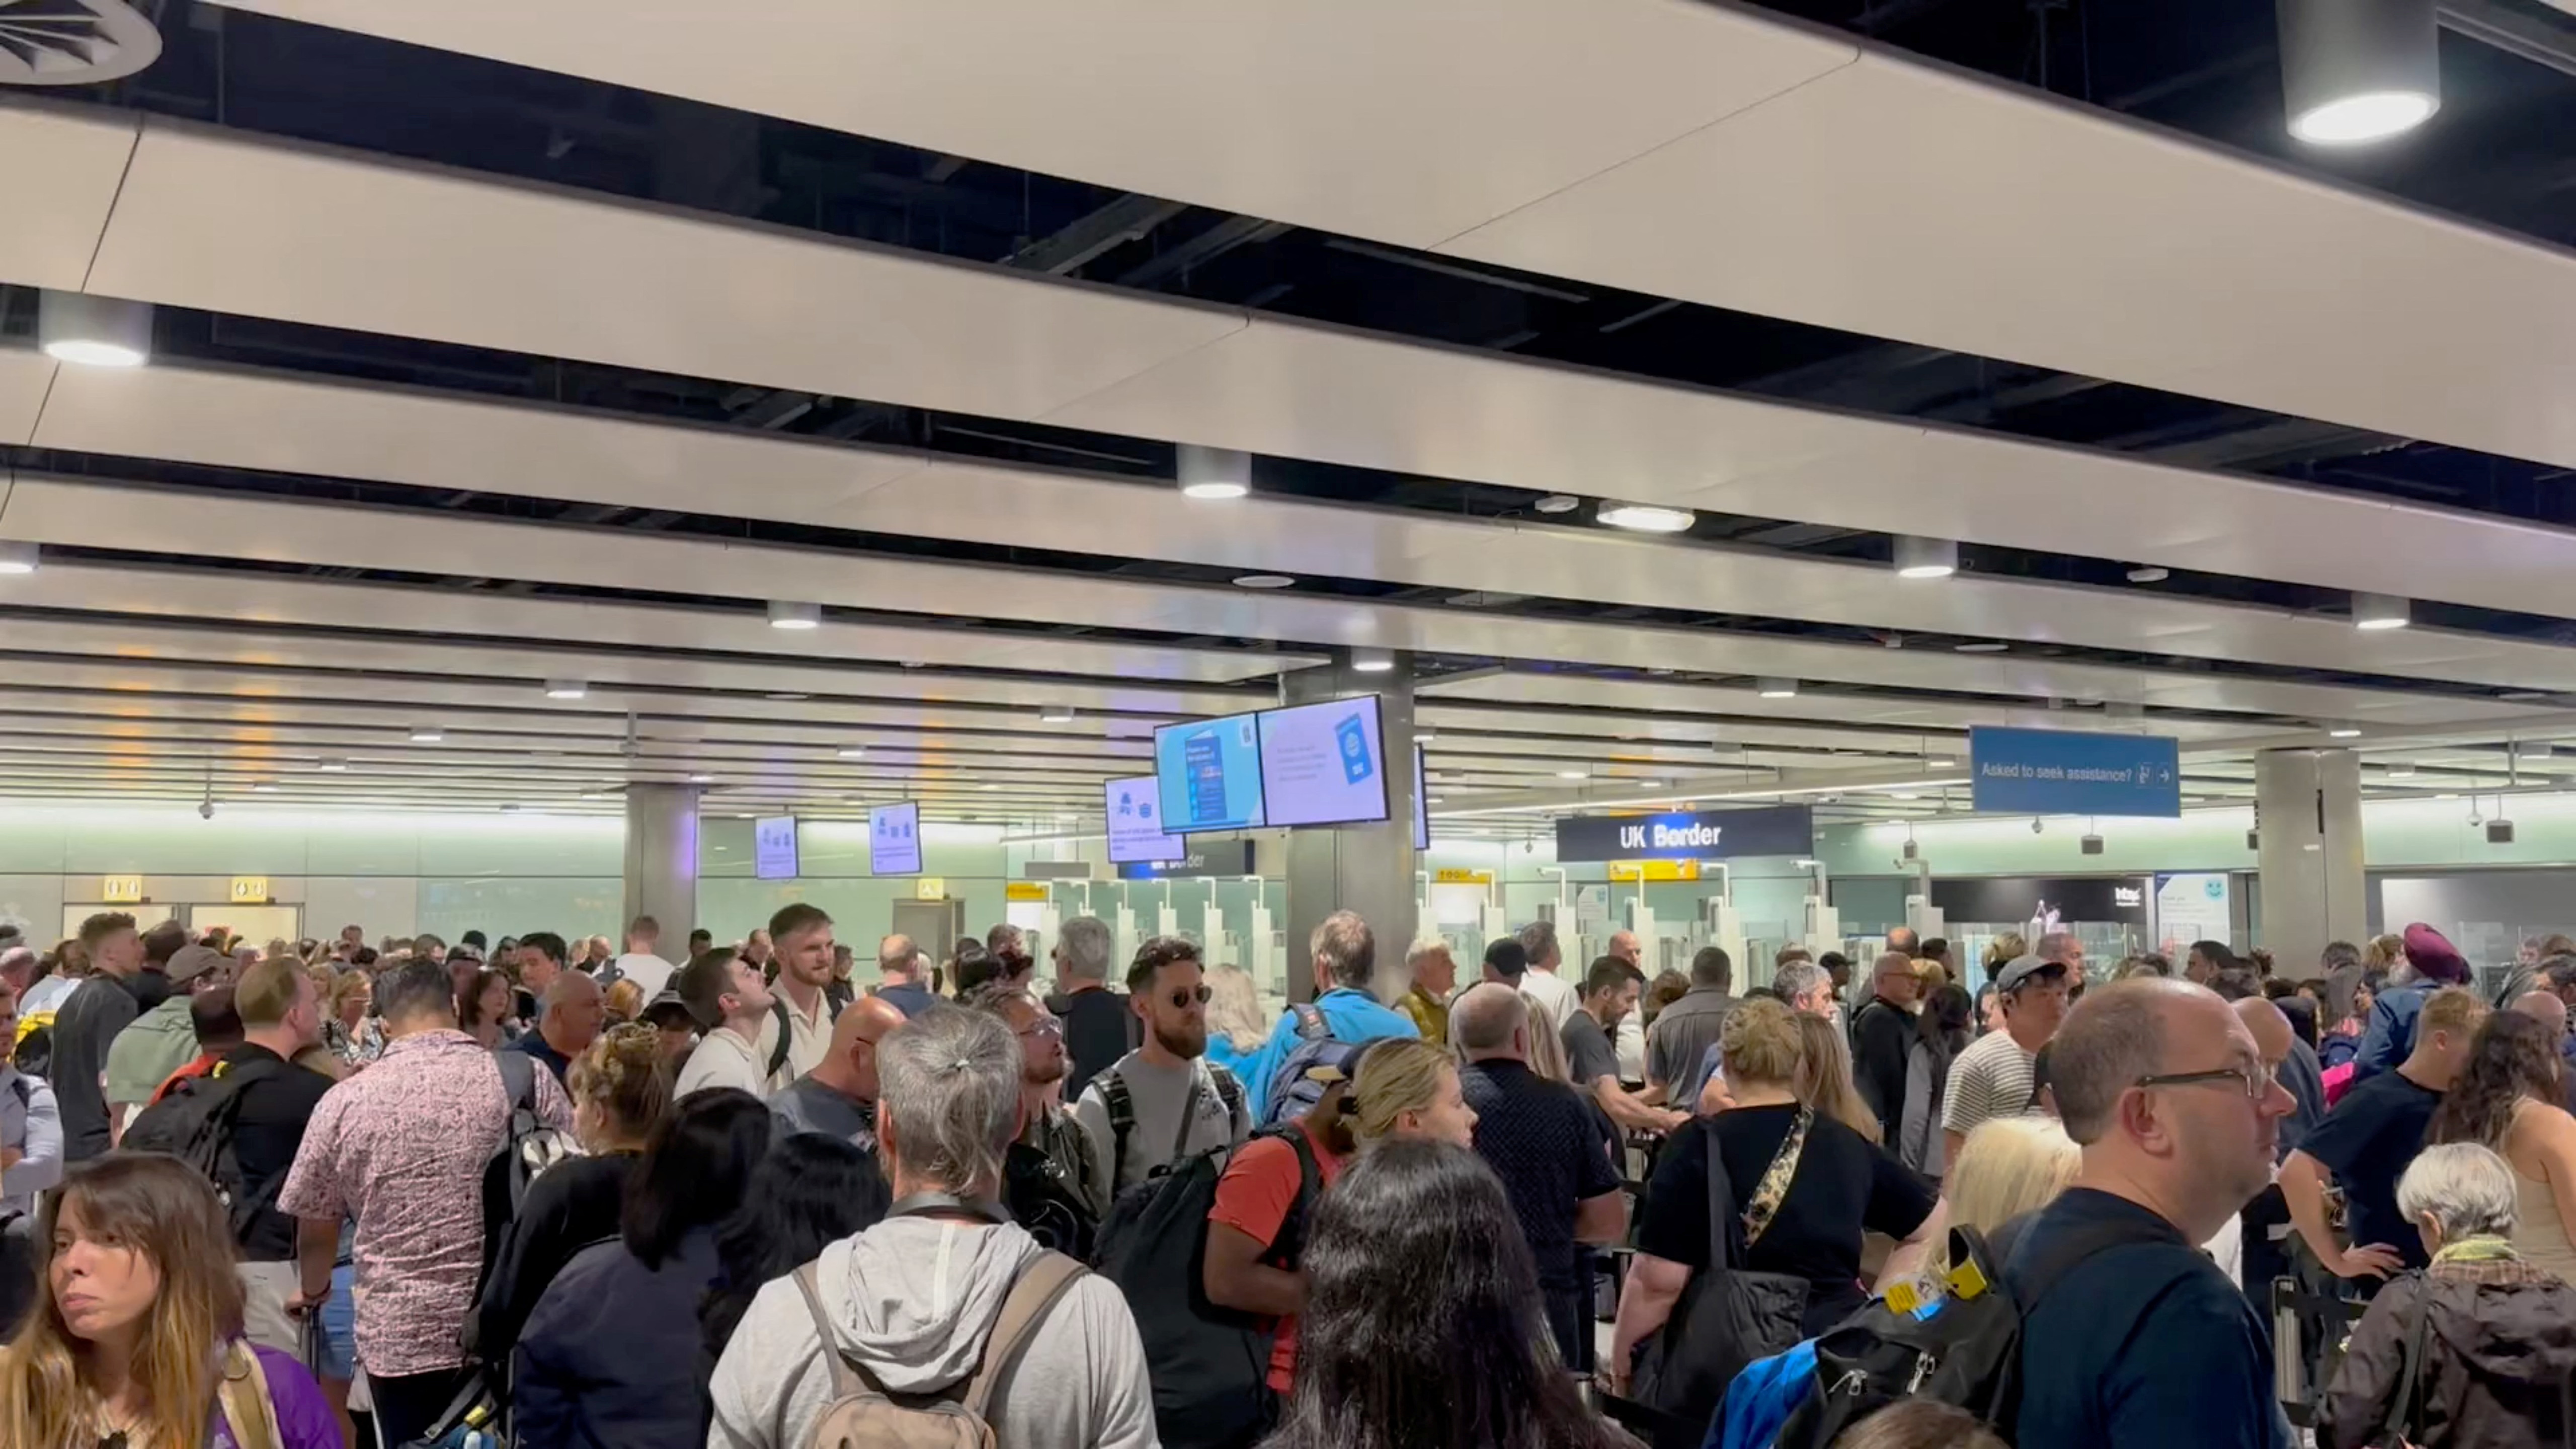 People wait in line at Heathrow airport, after the Border Force suffered a nationwide technical issue that affected passport control, in London